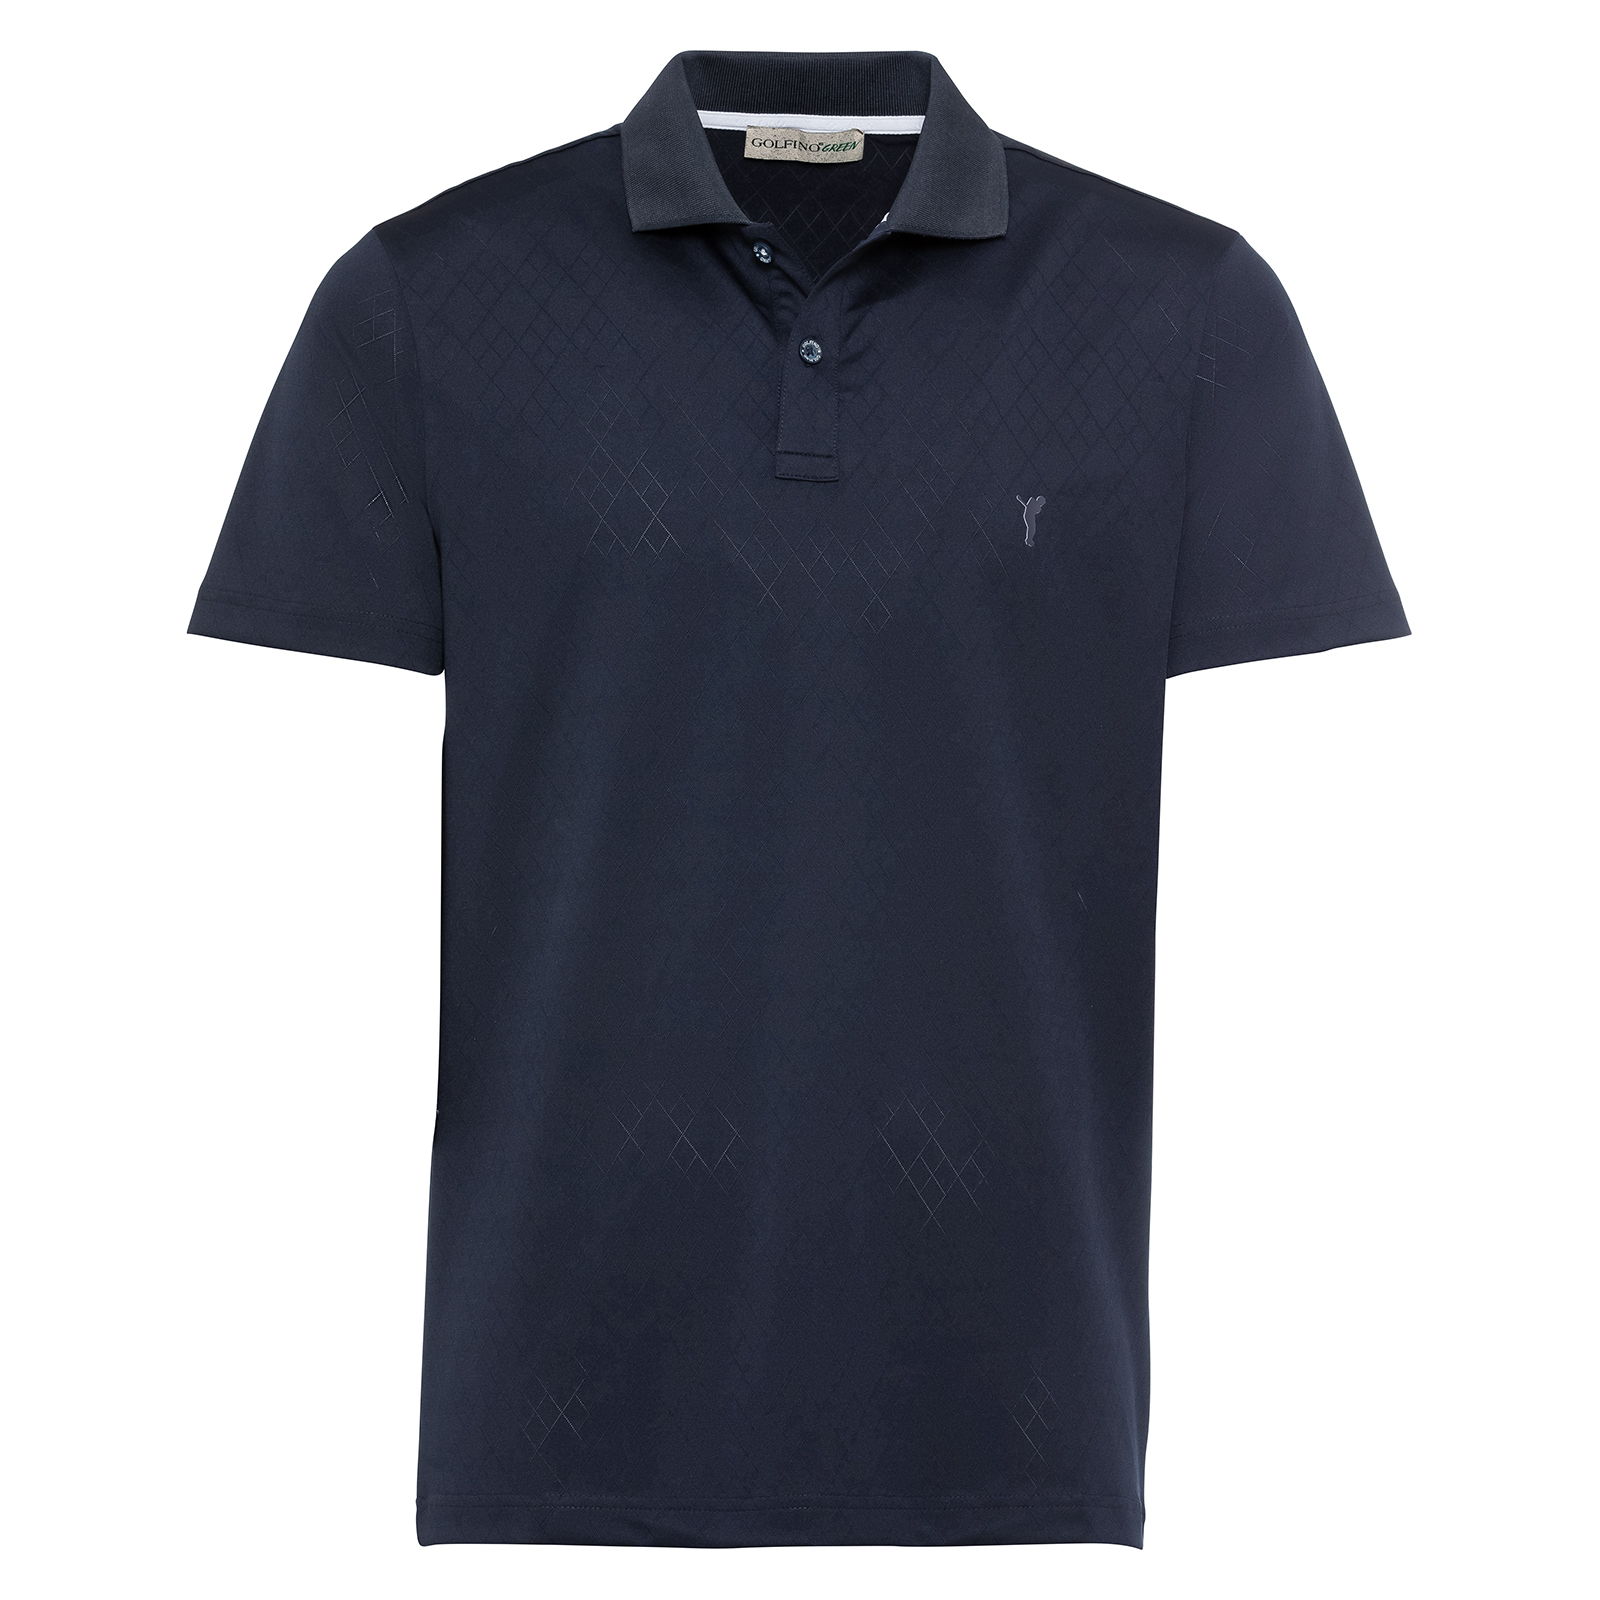 Men's sustainable stretch jacquard golf polo shirt 